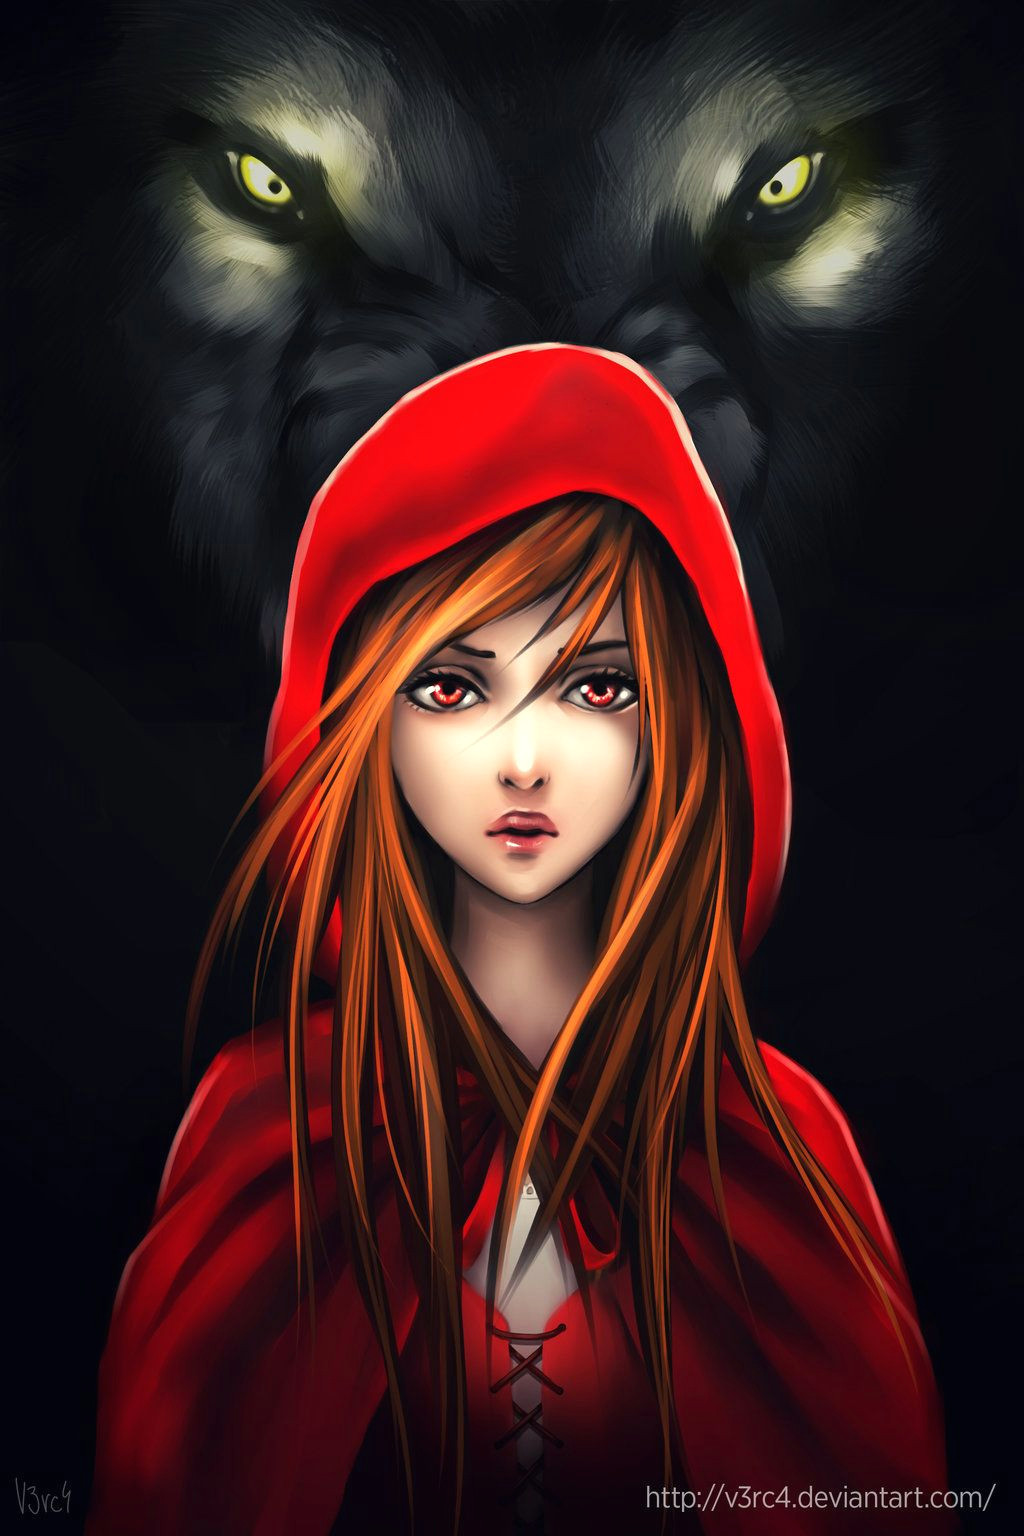 Wolf Drawing Red Riding Hood She Was once Red Riding Hood but Really Inside She Was the Wolf All